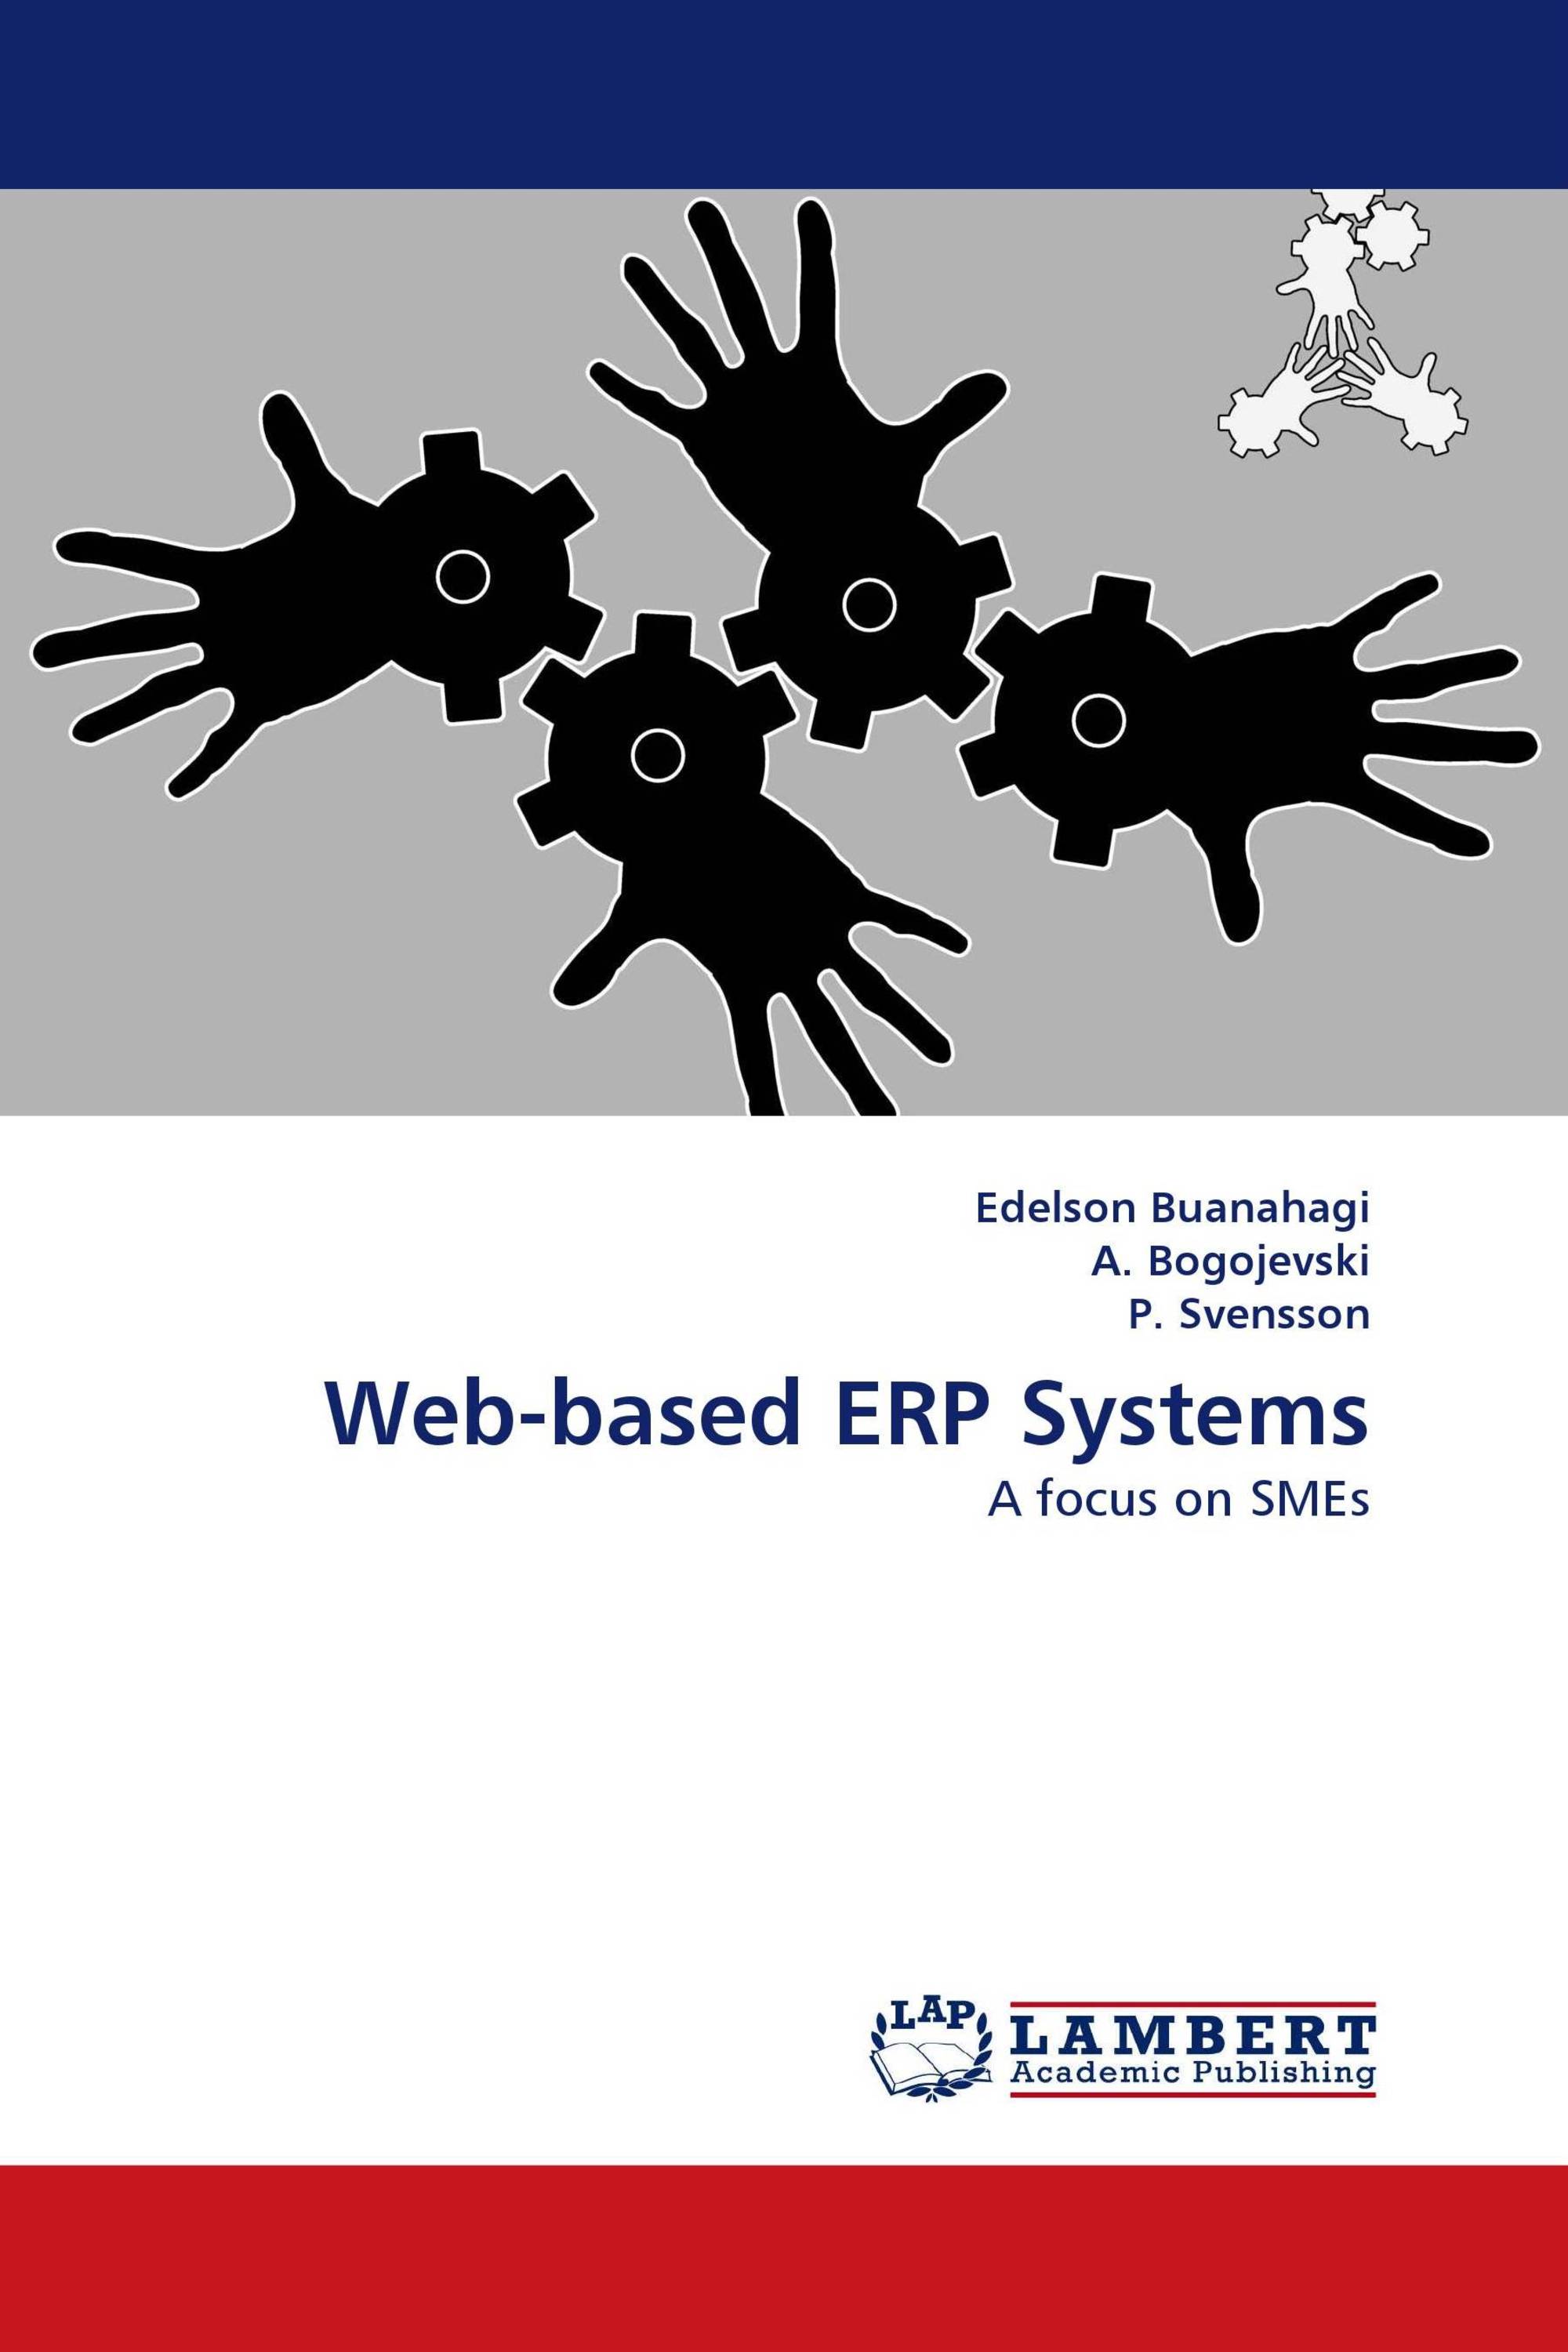 Web-based ERP Systems